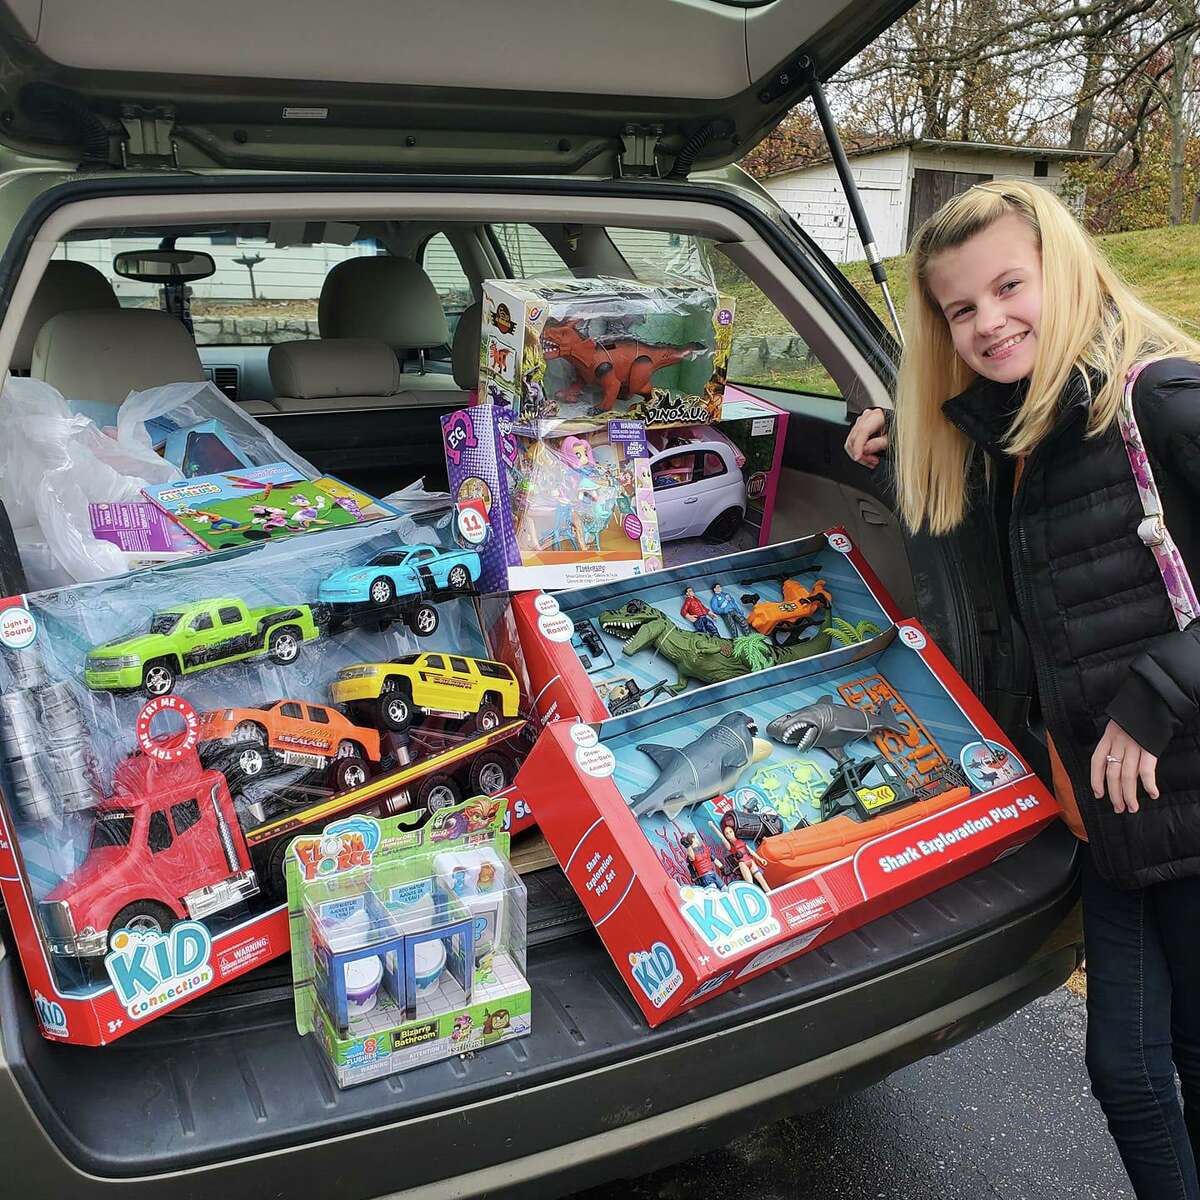 Faith Tremblay at The Edge Fitness Clubs Shelton last week picking up new unwrapped toys for YNHCH Toy Closet that people donated for Faith’s annual toy drive.